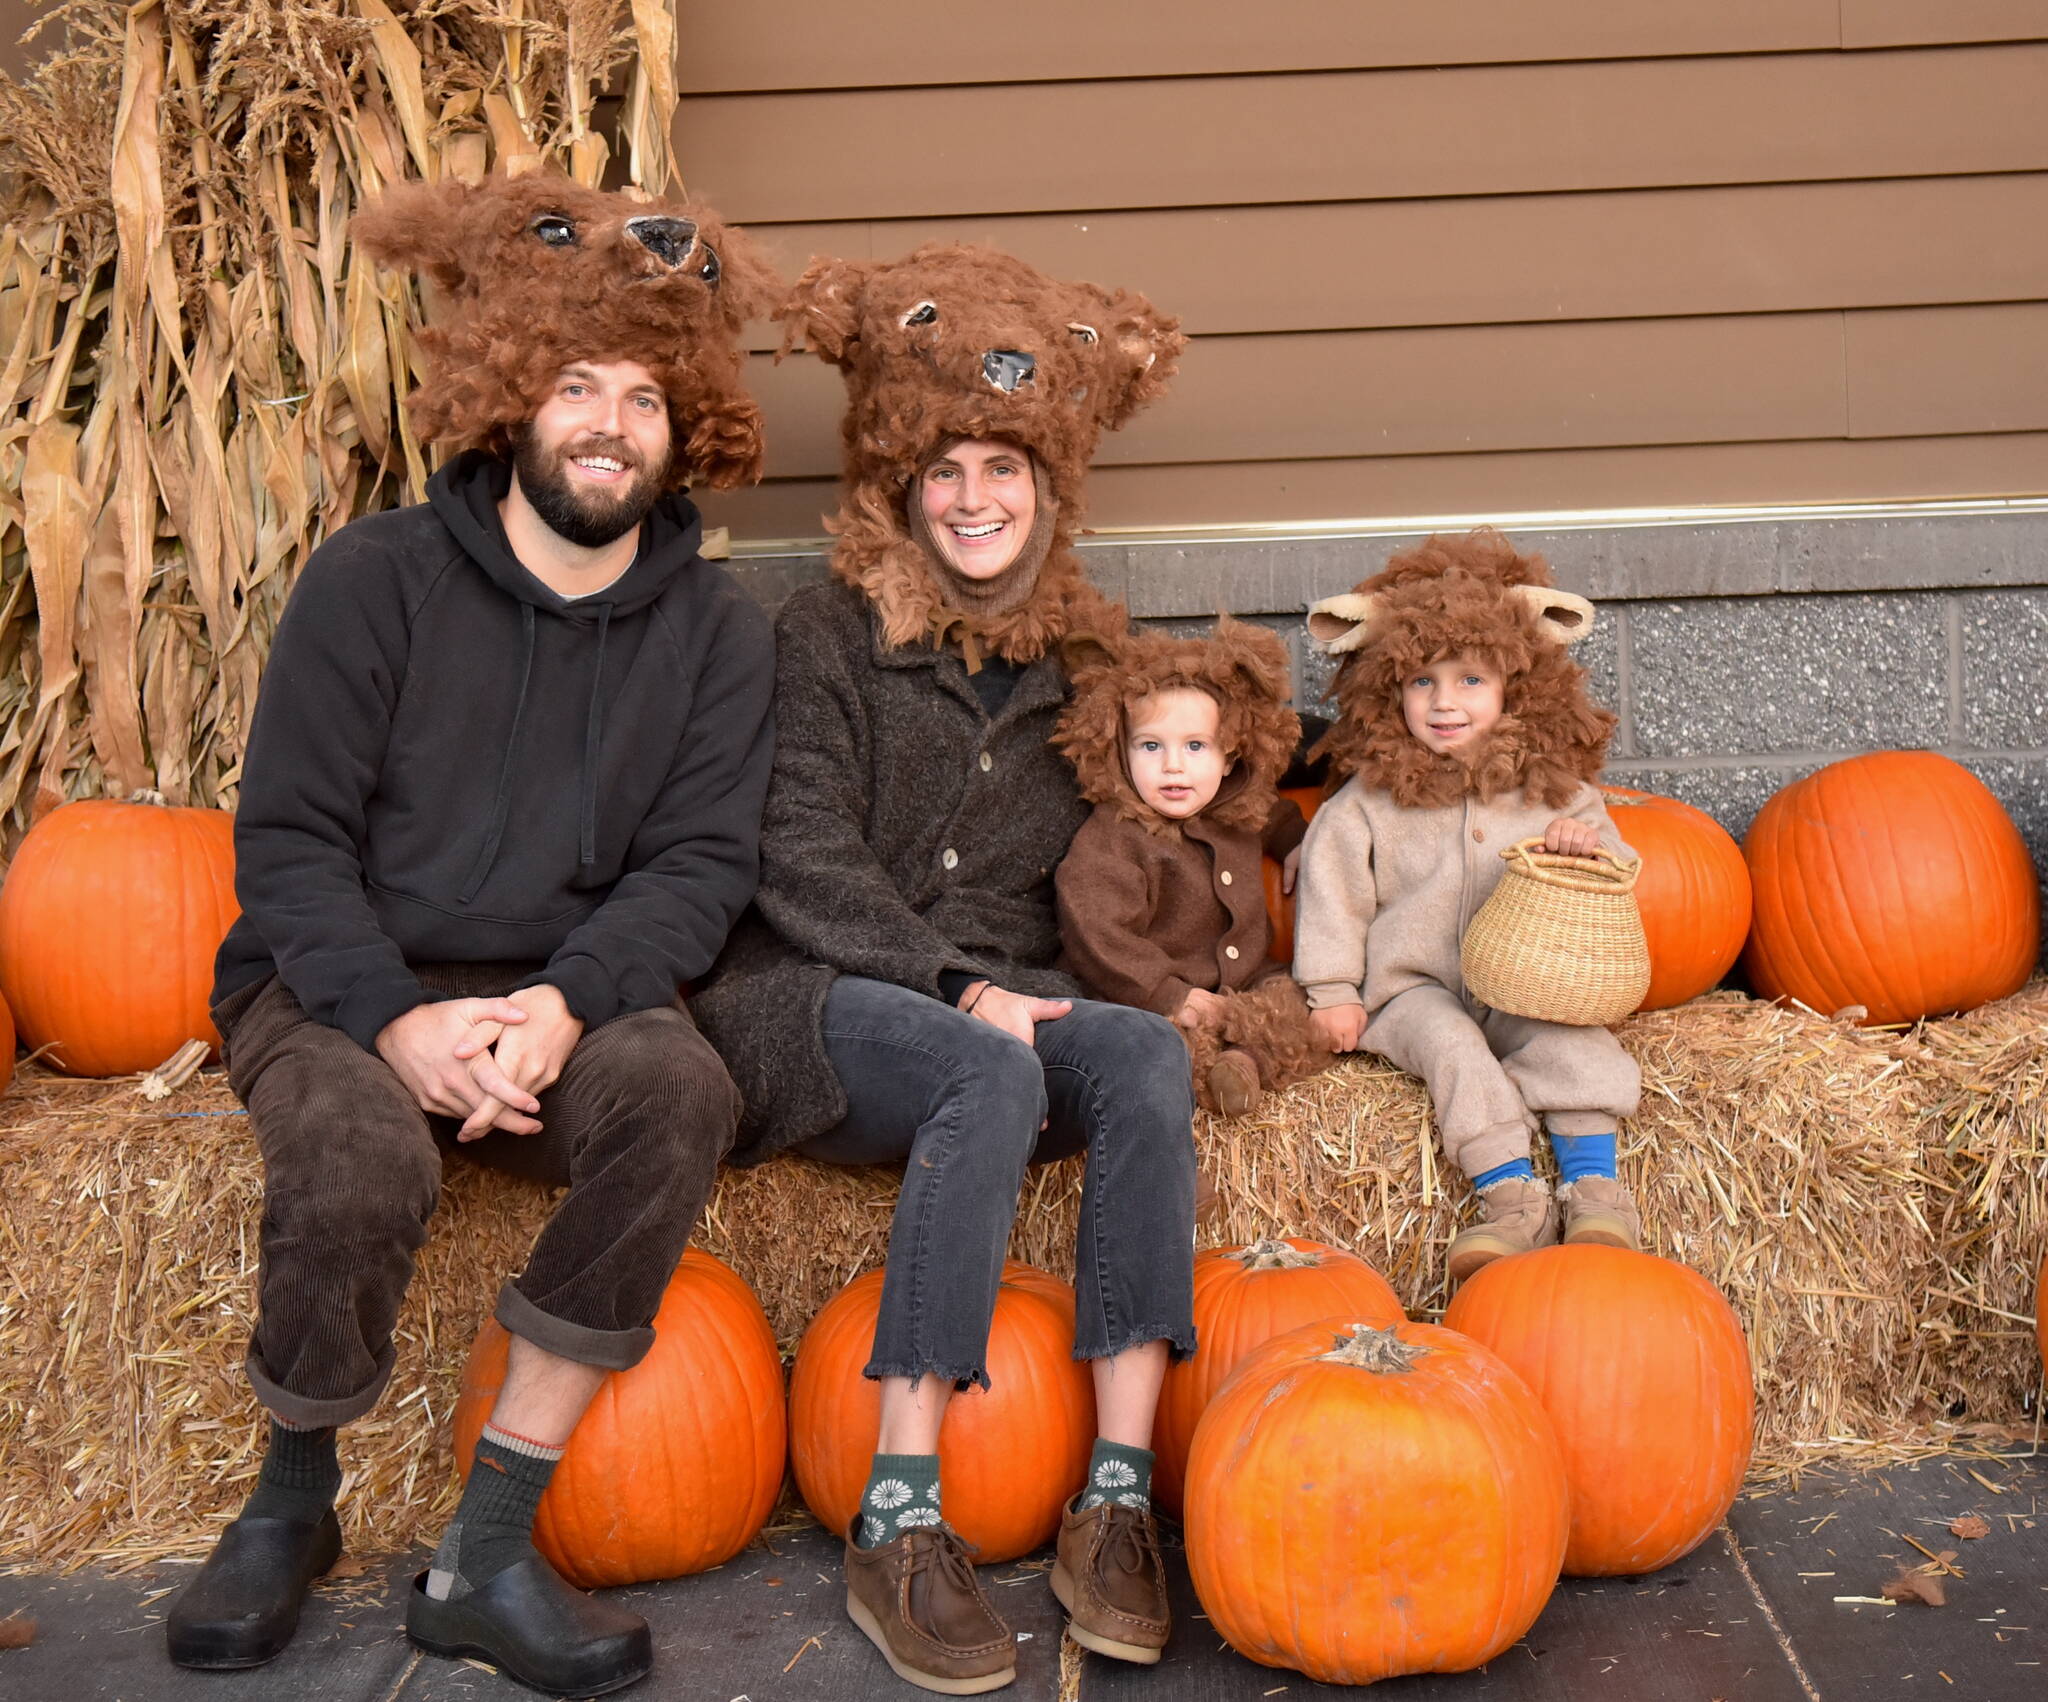 A bear family poses for photos in the pumpkin patch at Town & Country market.